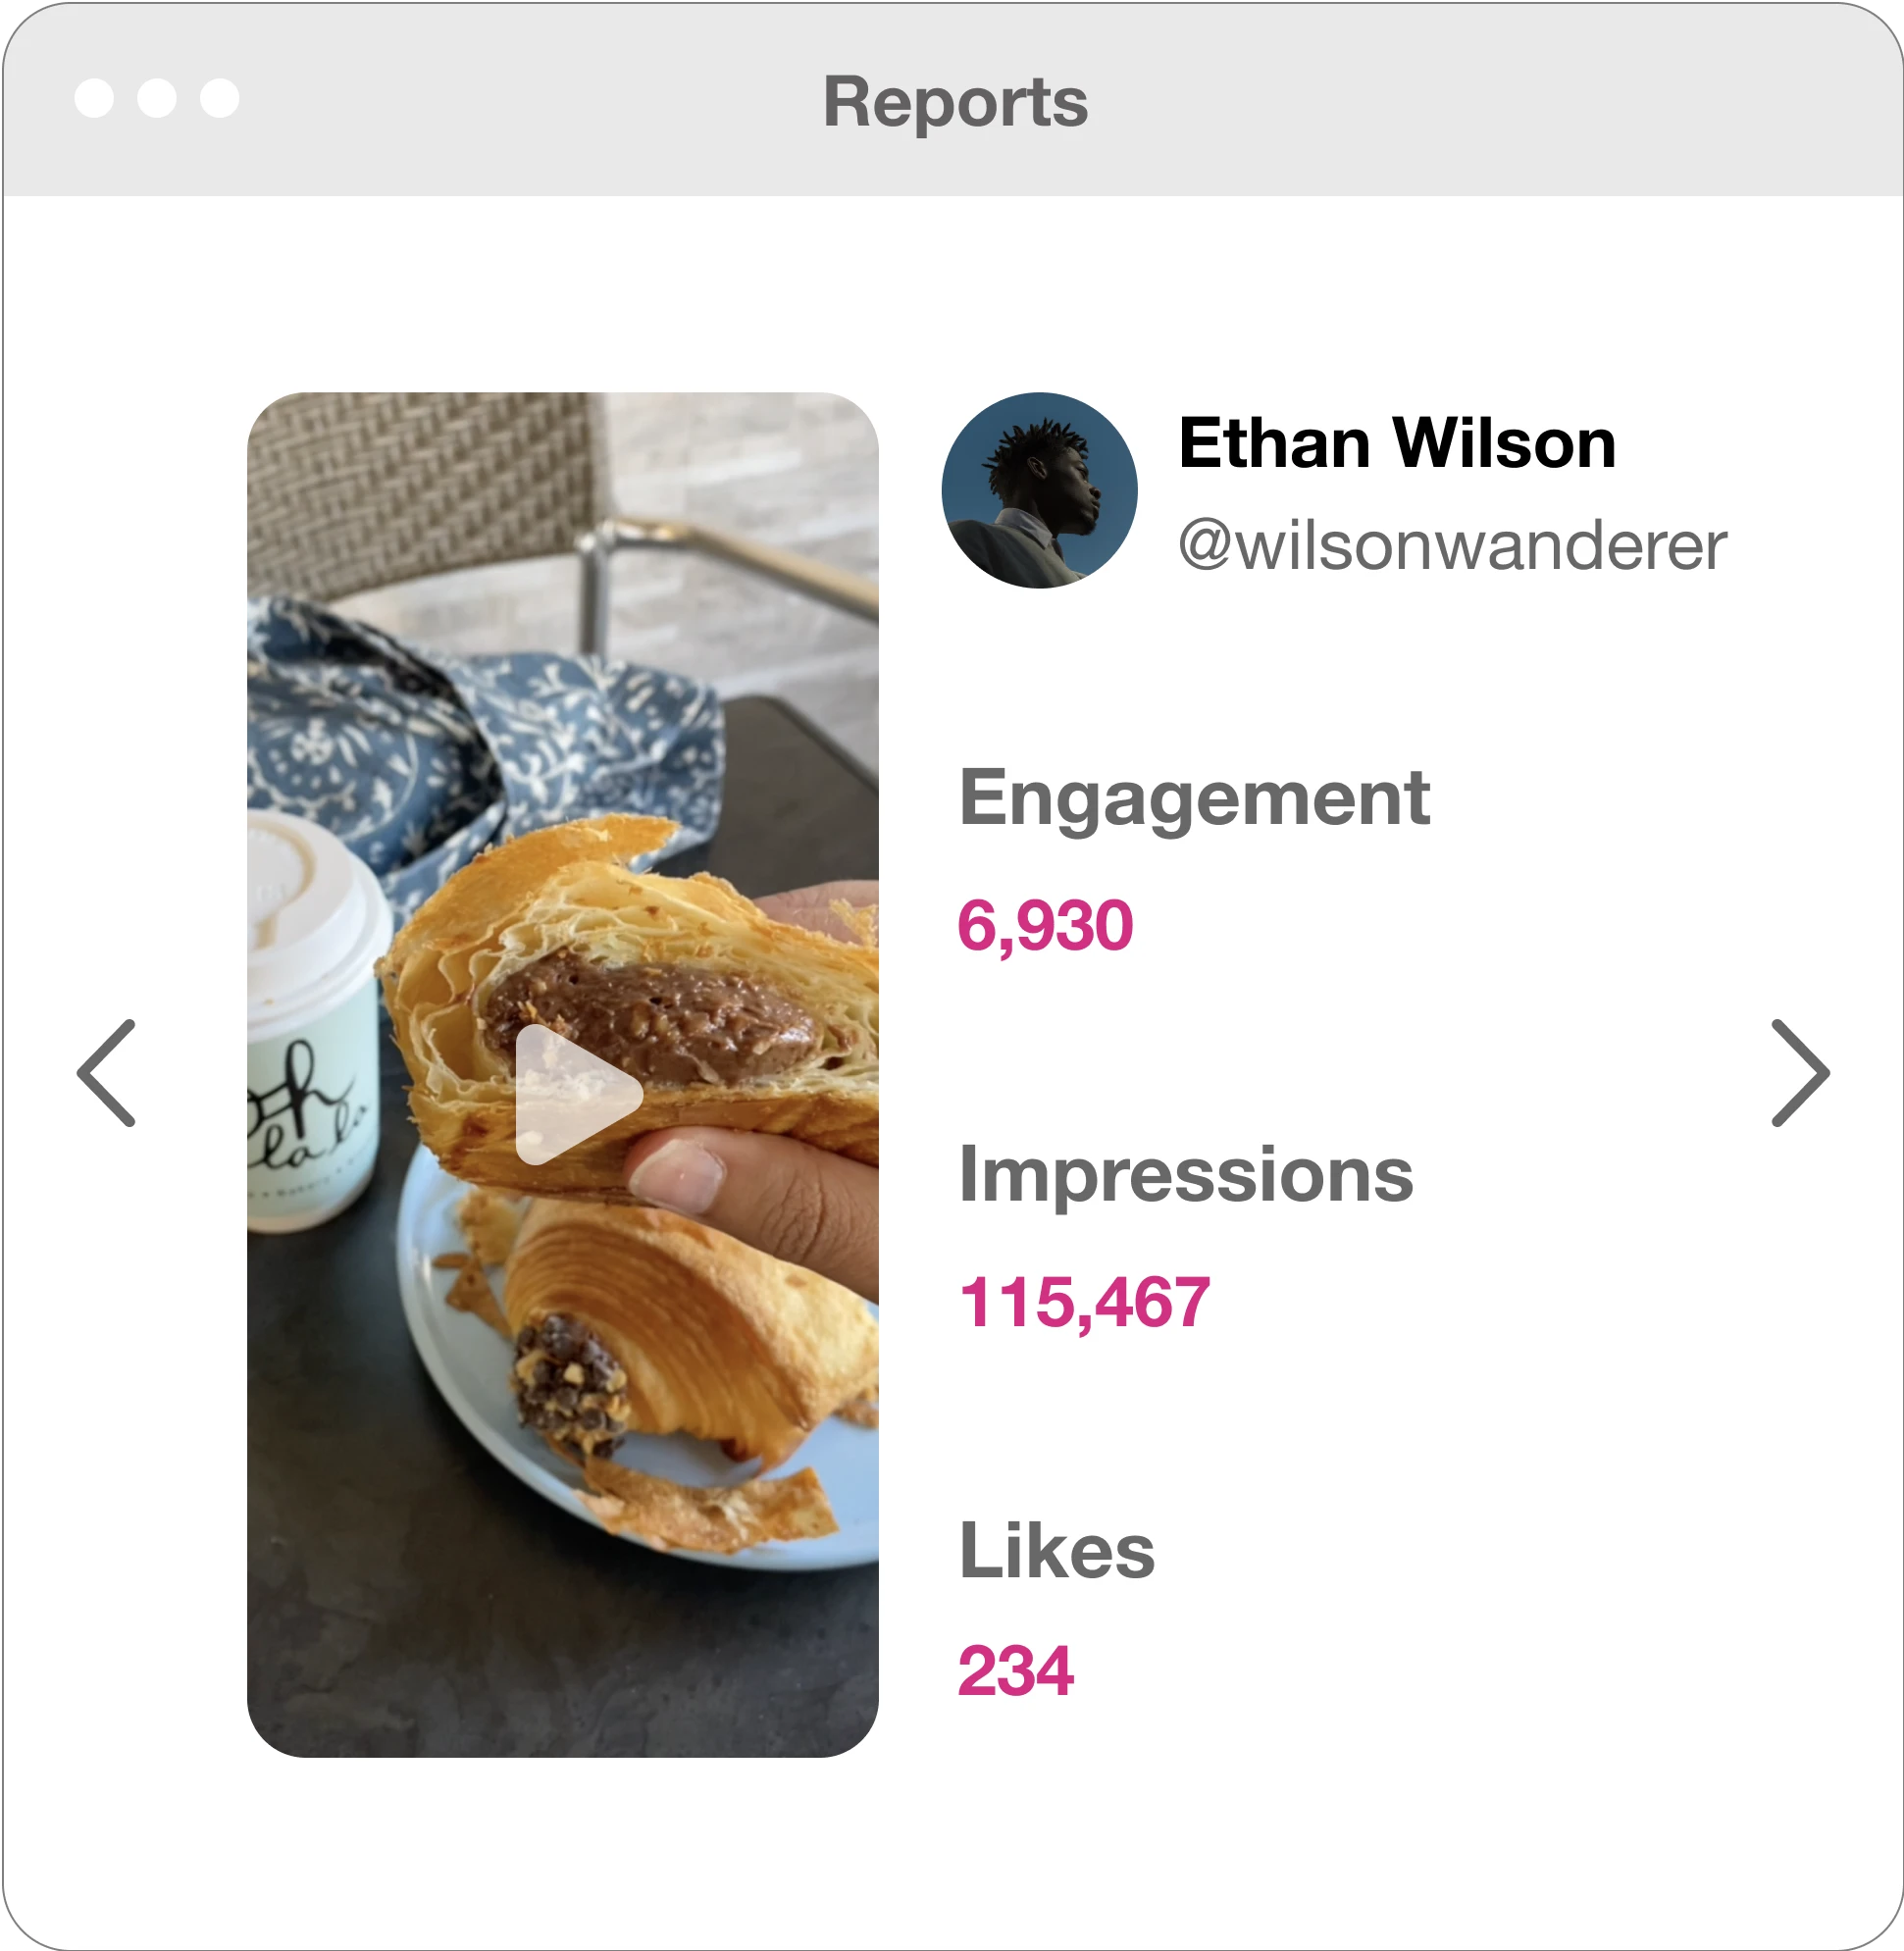 User Interface showing the report of the Influencer Ethan Wilson visiting a food bakery through Greet.